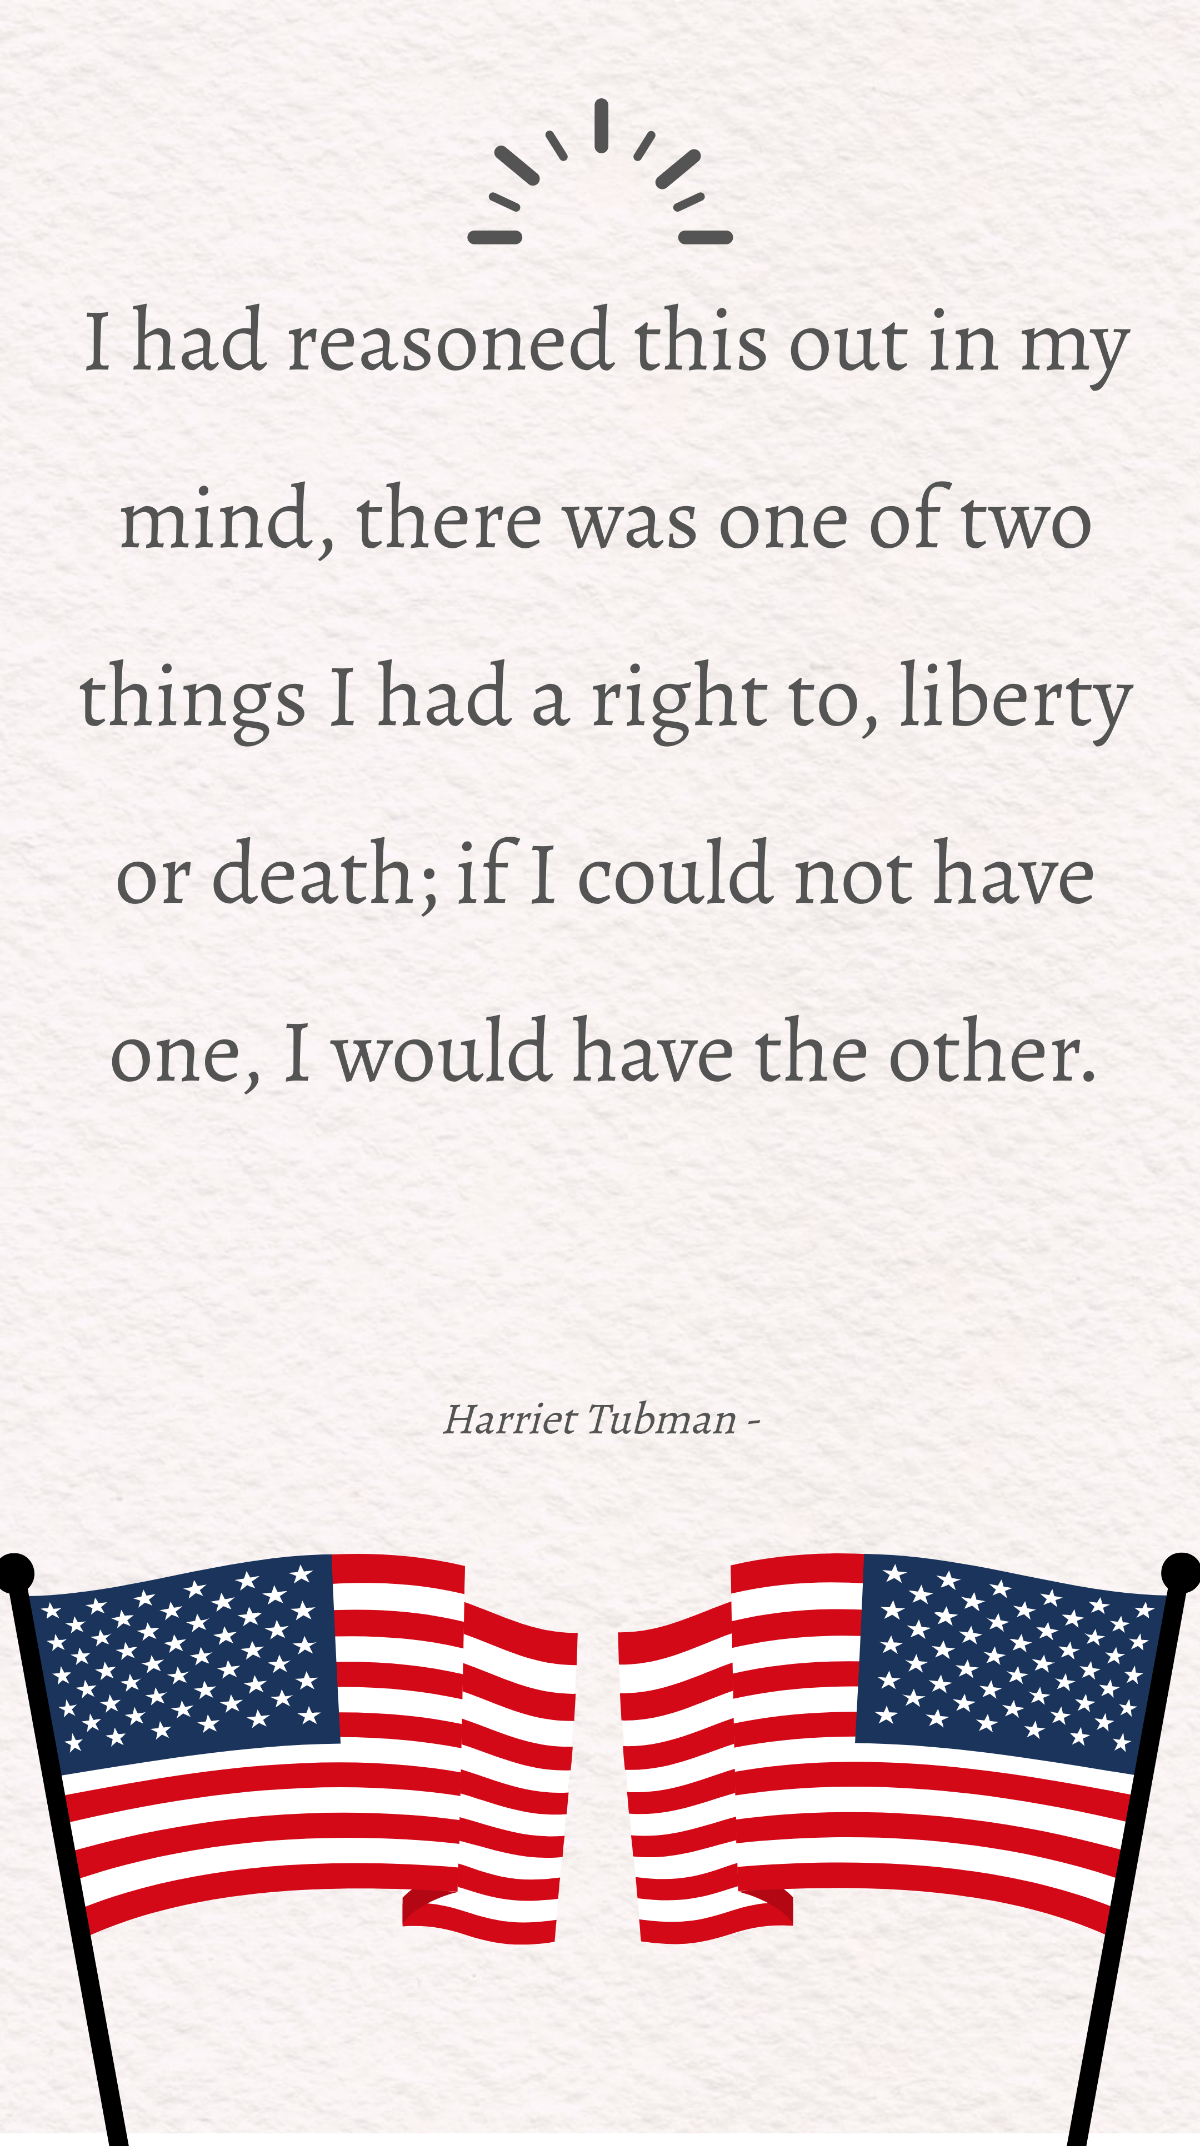 Harriet Tubman - I had reasoned this out in my mind, there was one of two things I had a right to, liberty or death; if I could not have one, I would have the other. Template